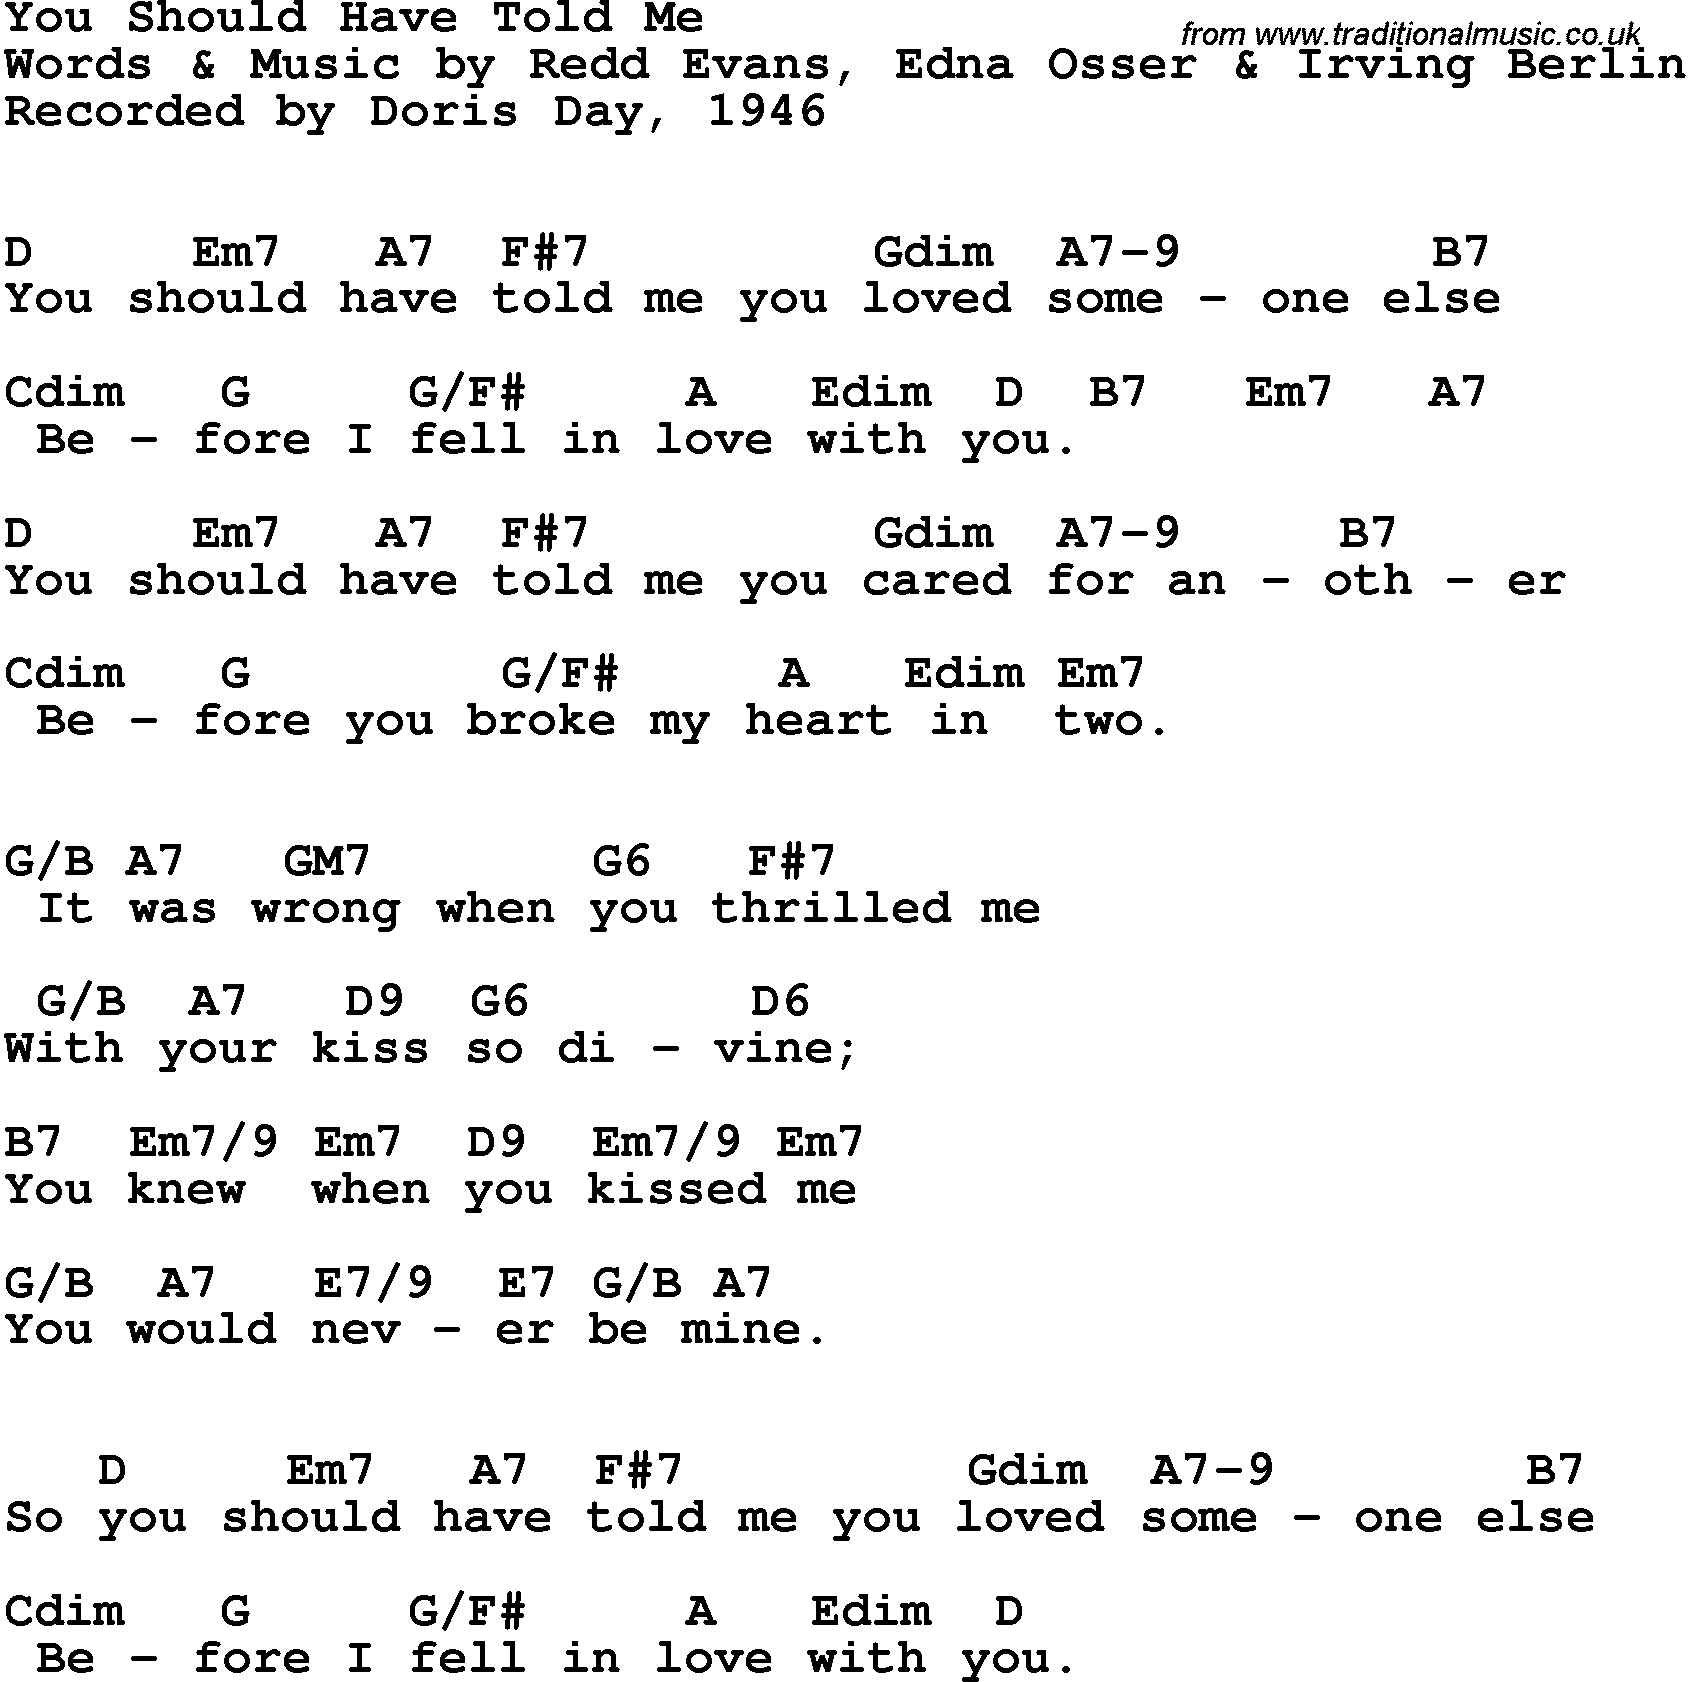 Song Lyrics with guitar chords for You Should Have Told Me - Doris Day, 1946